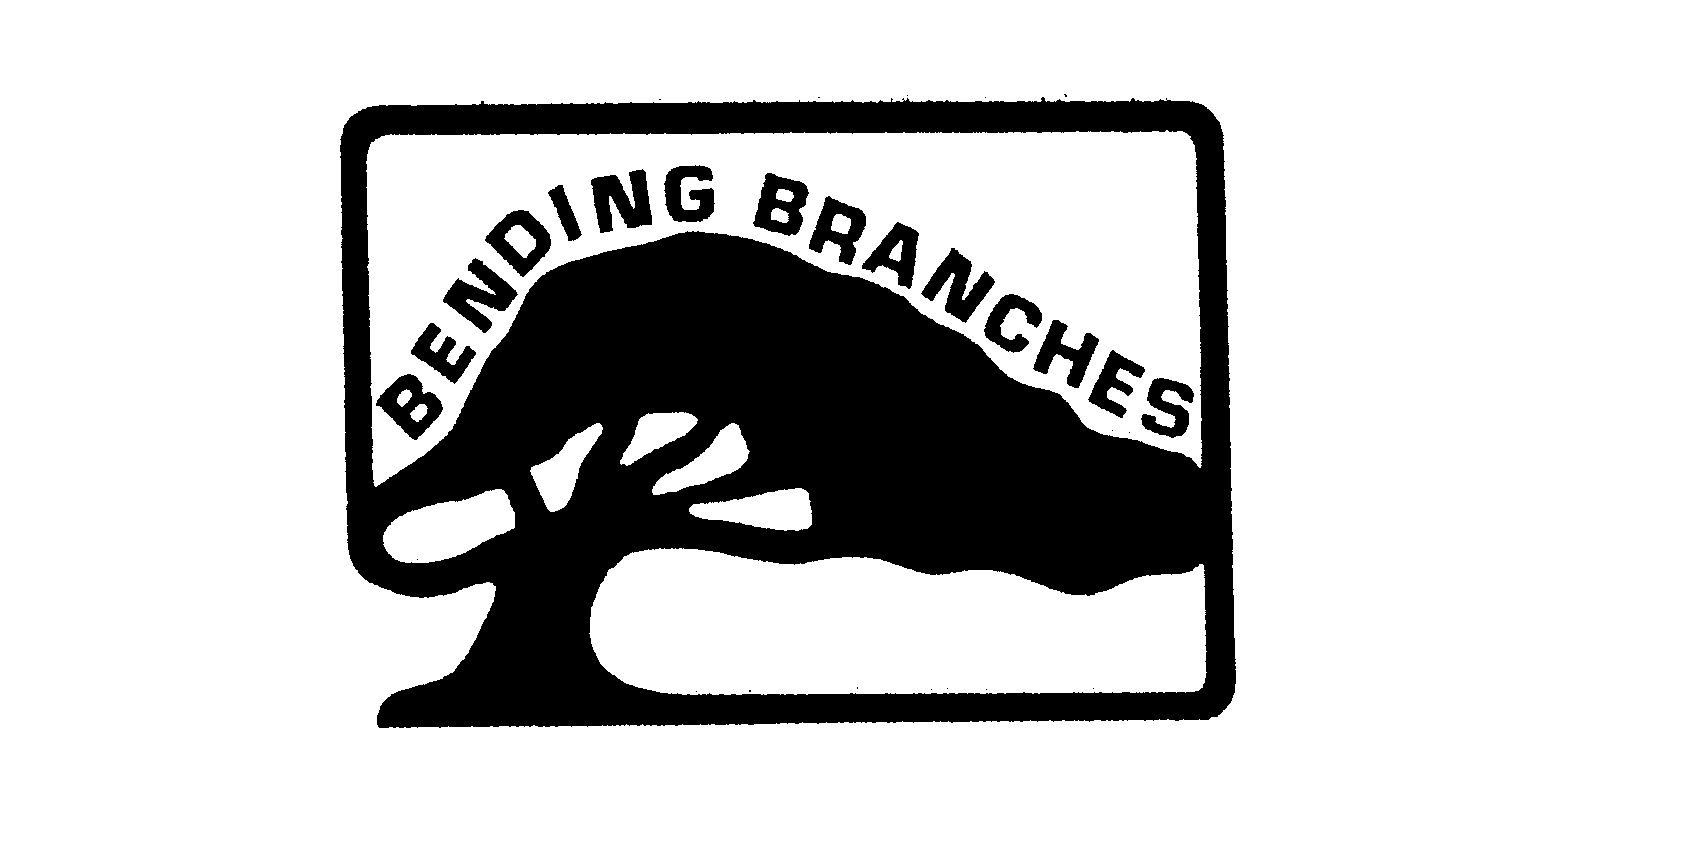 BENDING BRANCHES